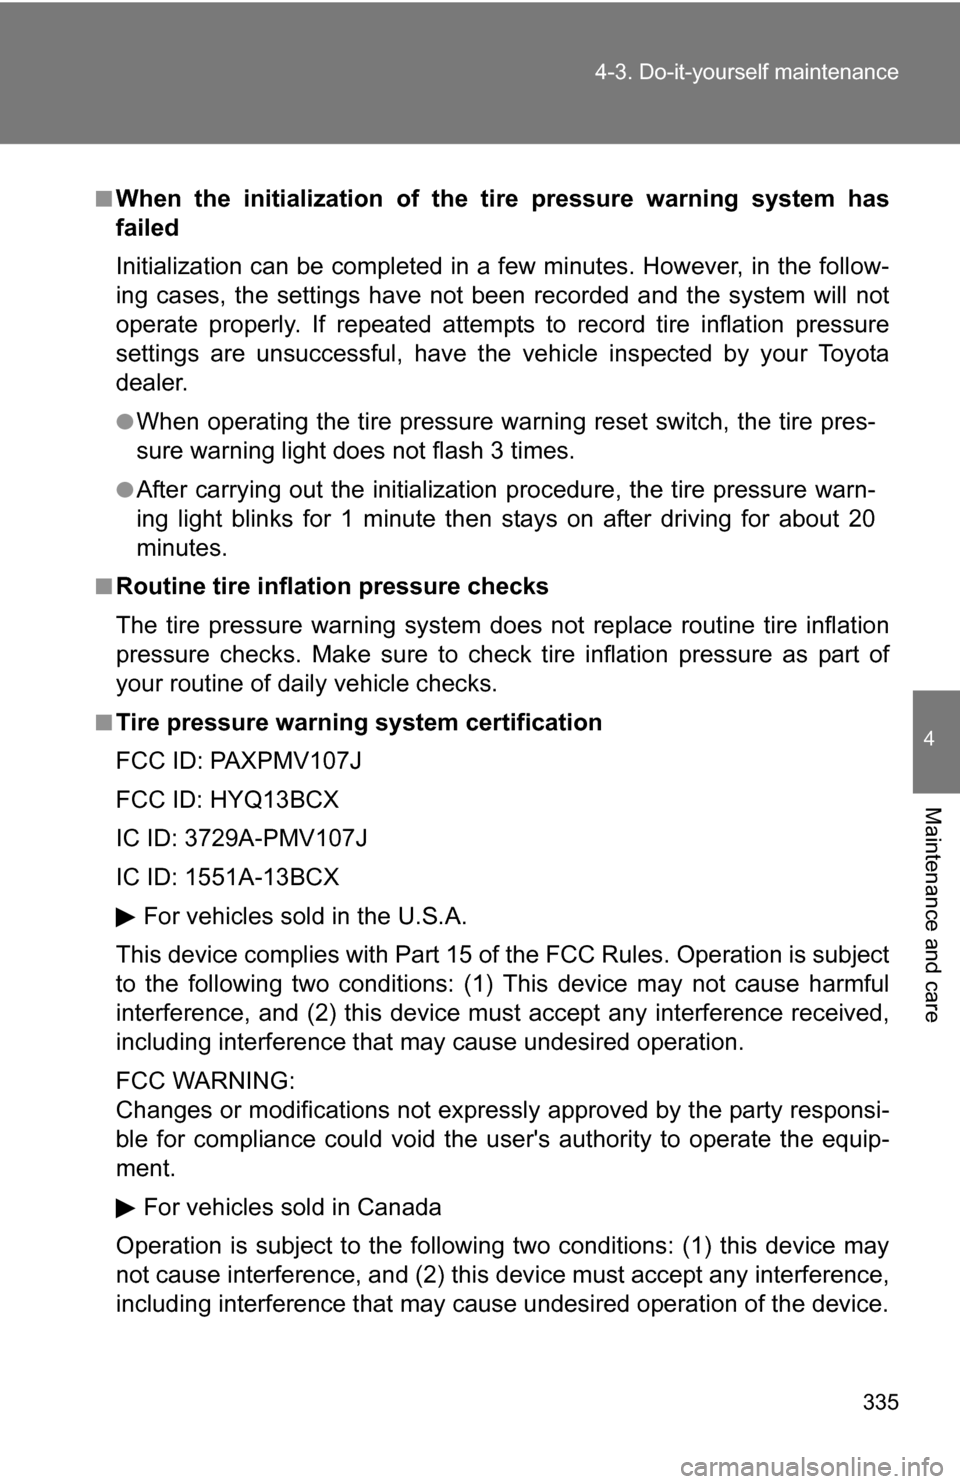 TOYOTA COROLLA 2010 10.G Owners Manual 335
4-3. Do-it-yourself maintenance
4
Maintenance and care
■When the initialization of the tire pressure warning system has
failed
Initialization can be completed in a few minutes. However, in the f